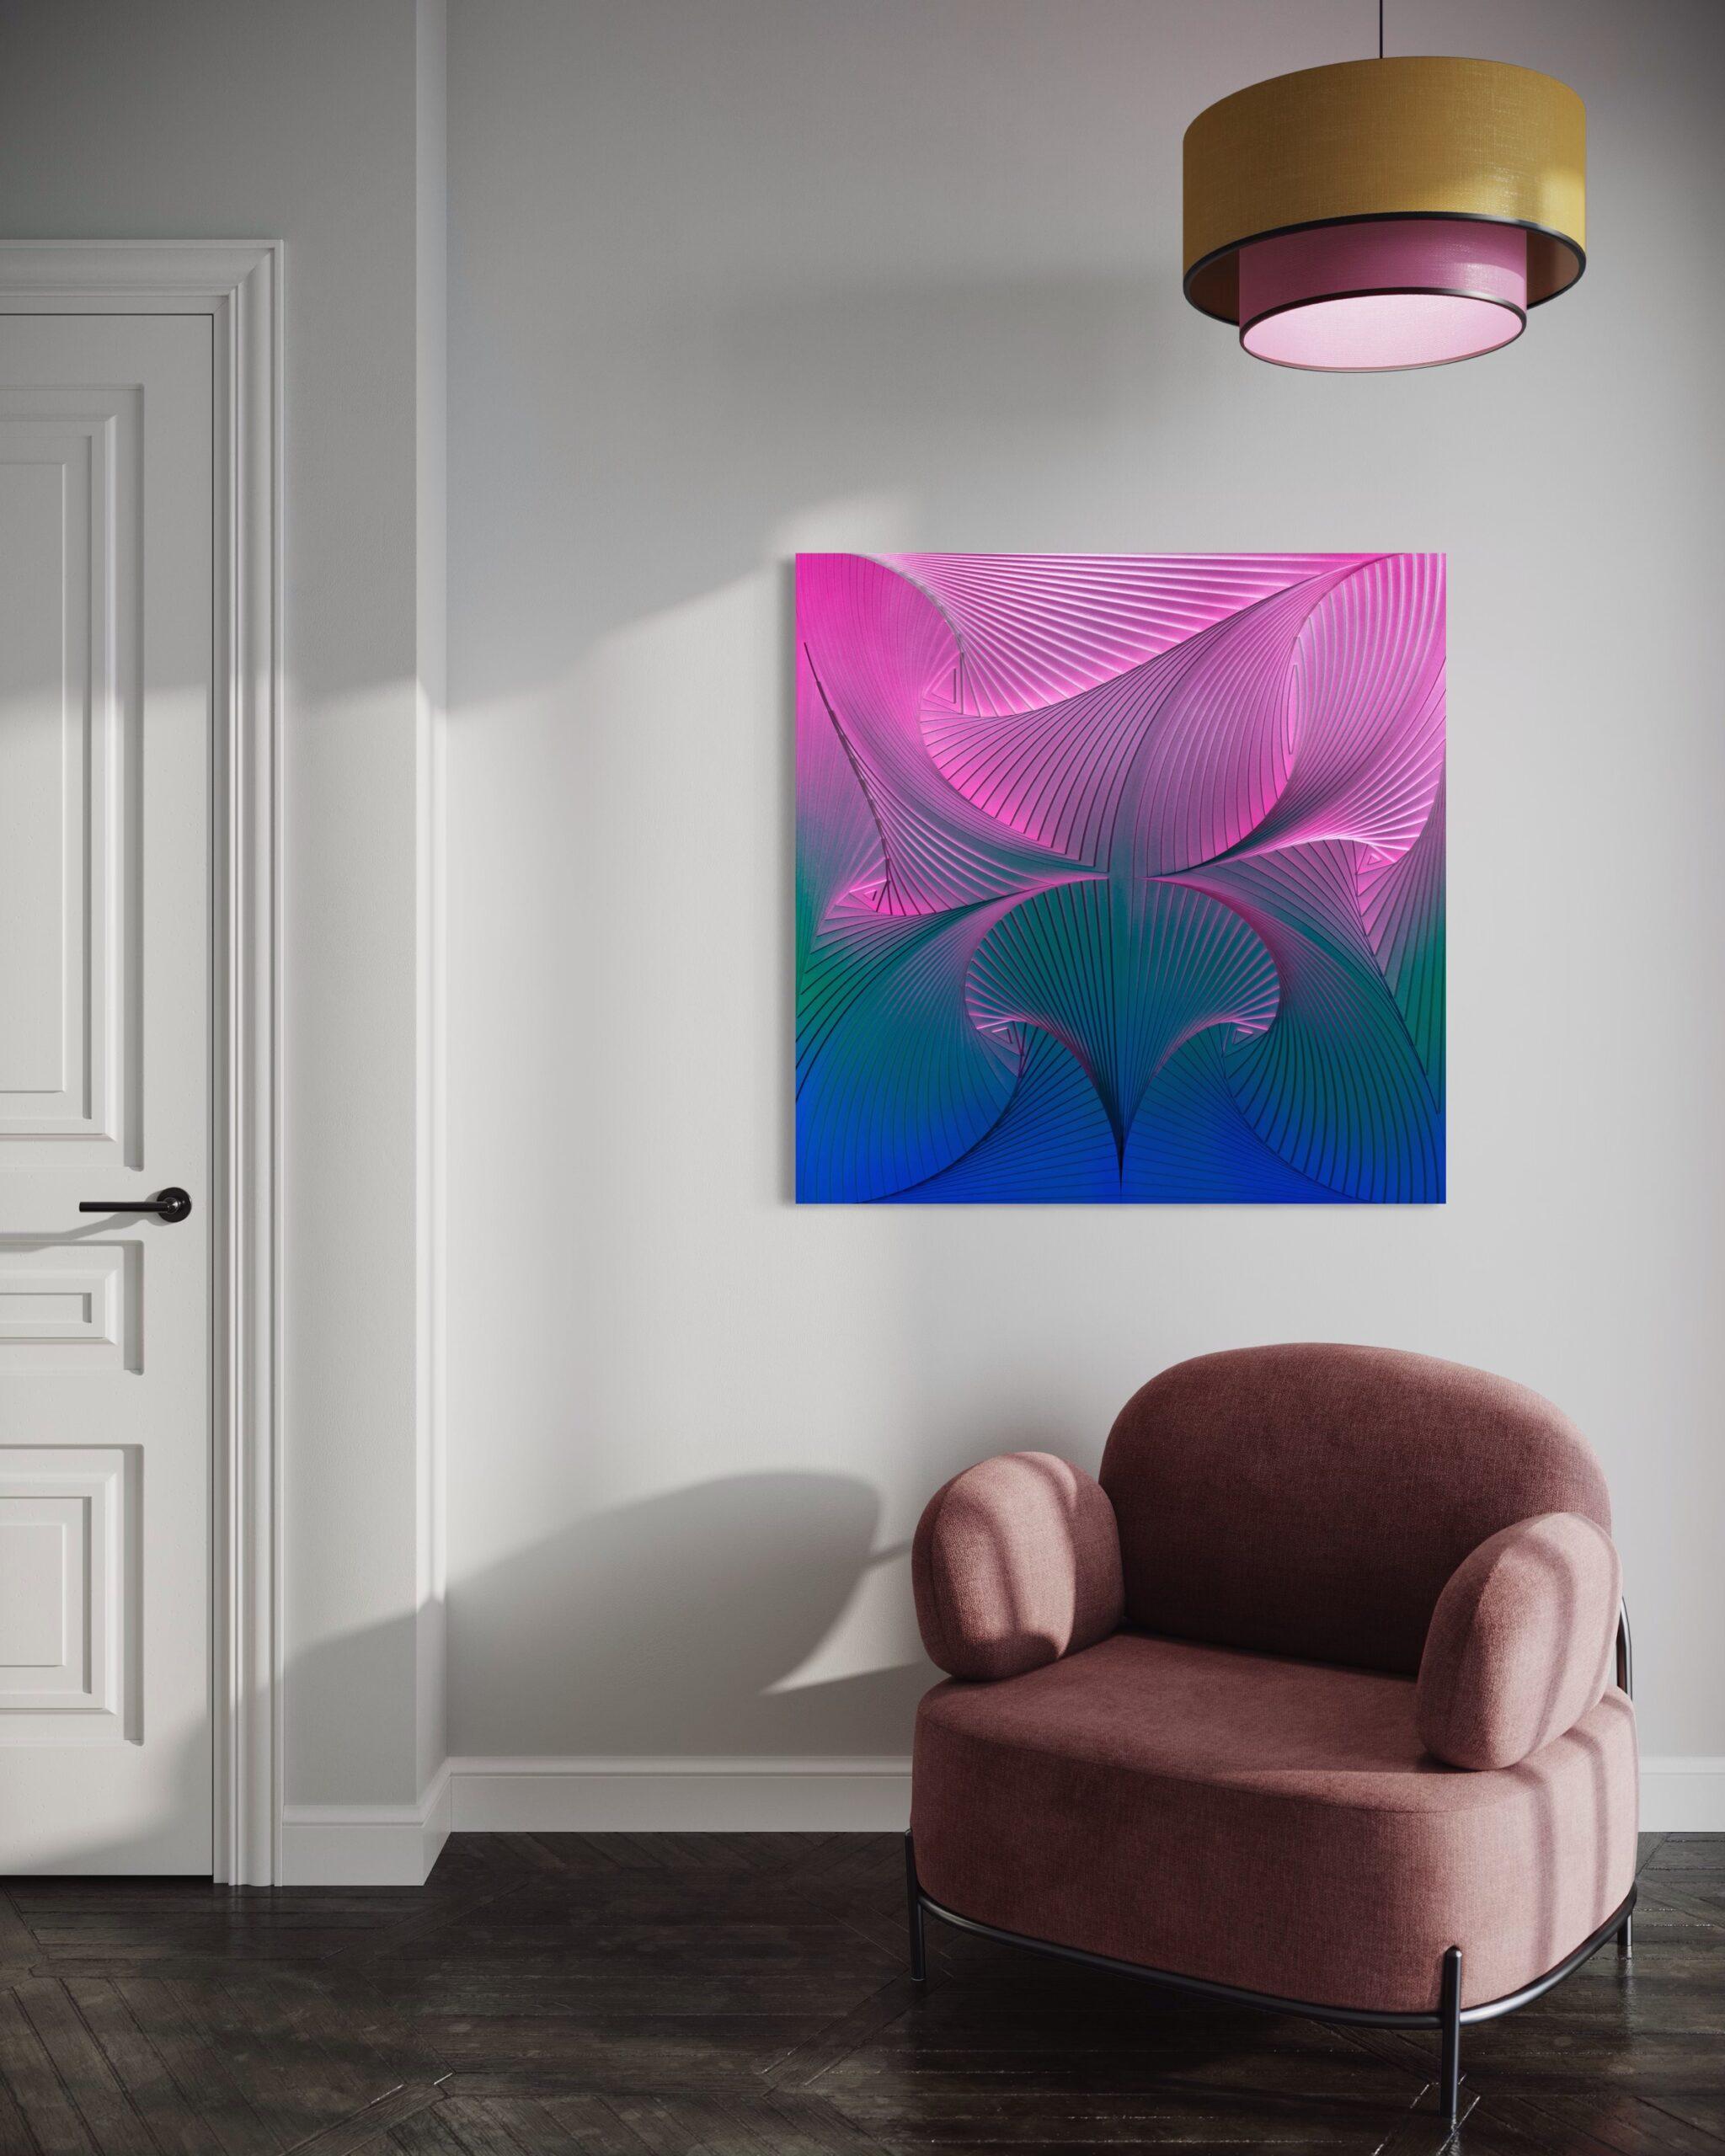 In Didem Yagci’s artwork “Aurora,” she intricately layers cut wood panels on plaster, creating a mesmerizing symmetrical design. The wall sculpture is animated by a flawless gradient of paint, smoothly shifting from cobalt blue to green and